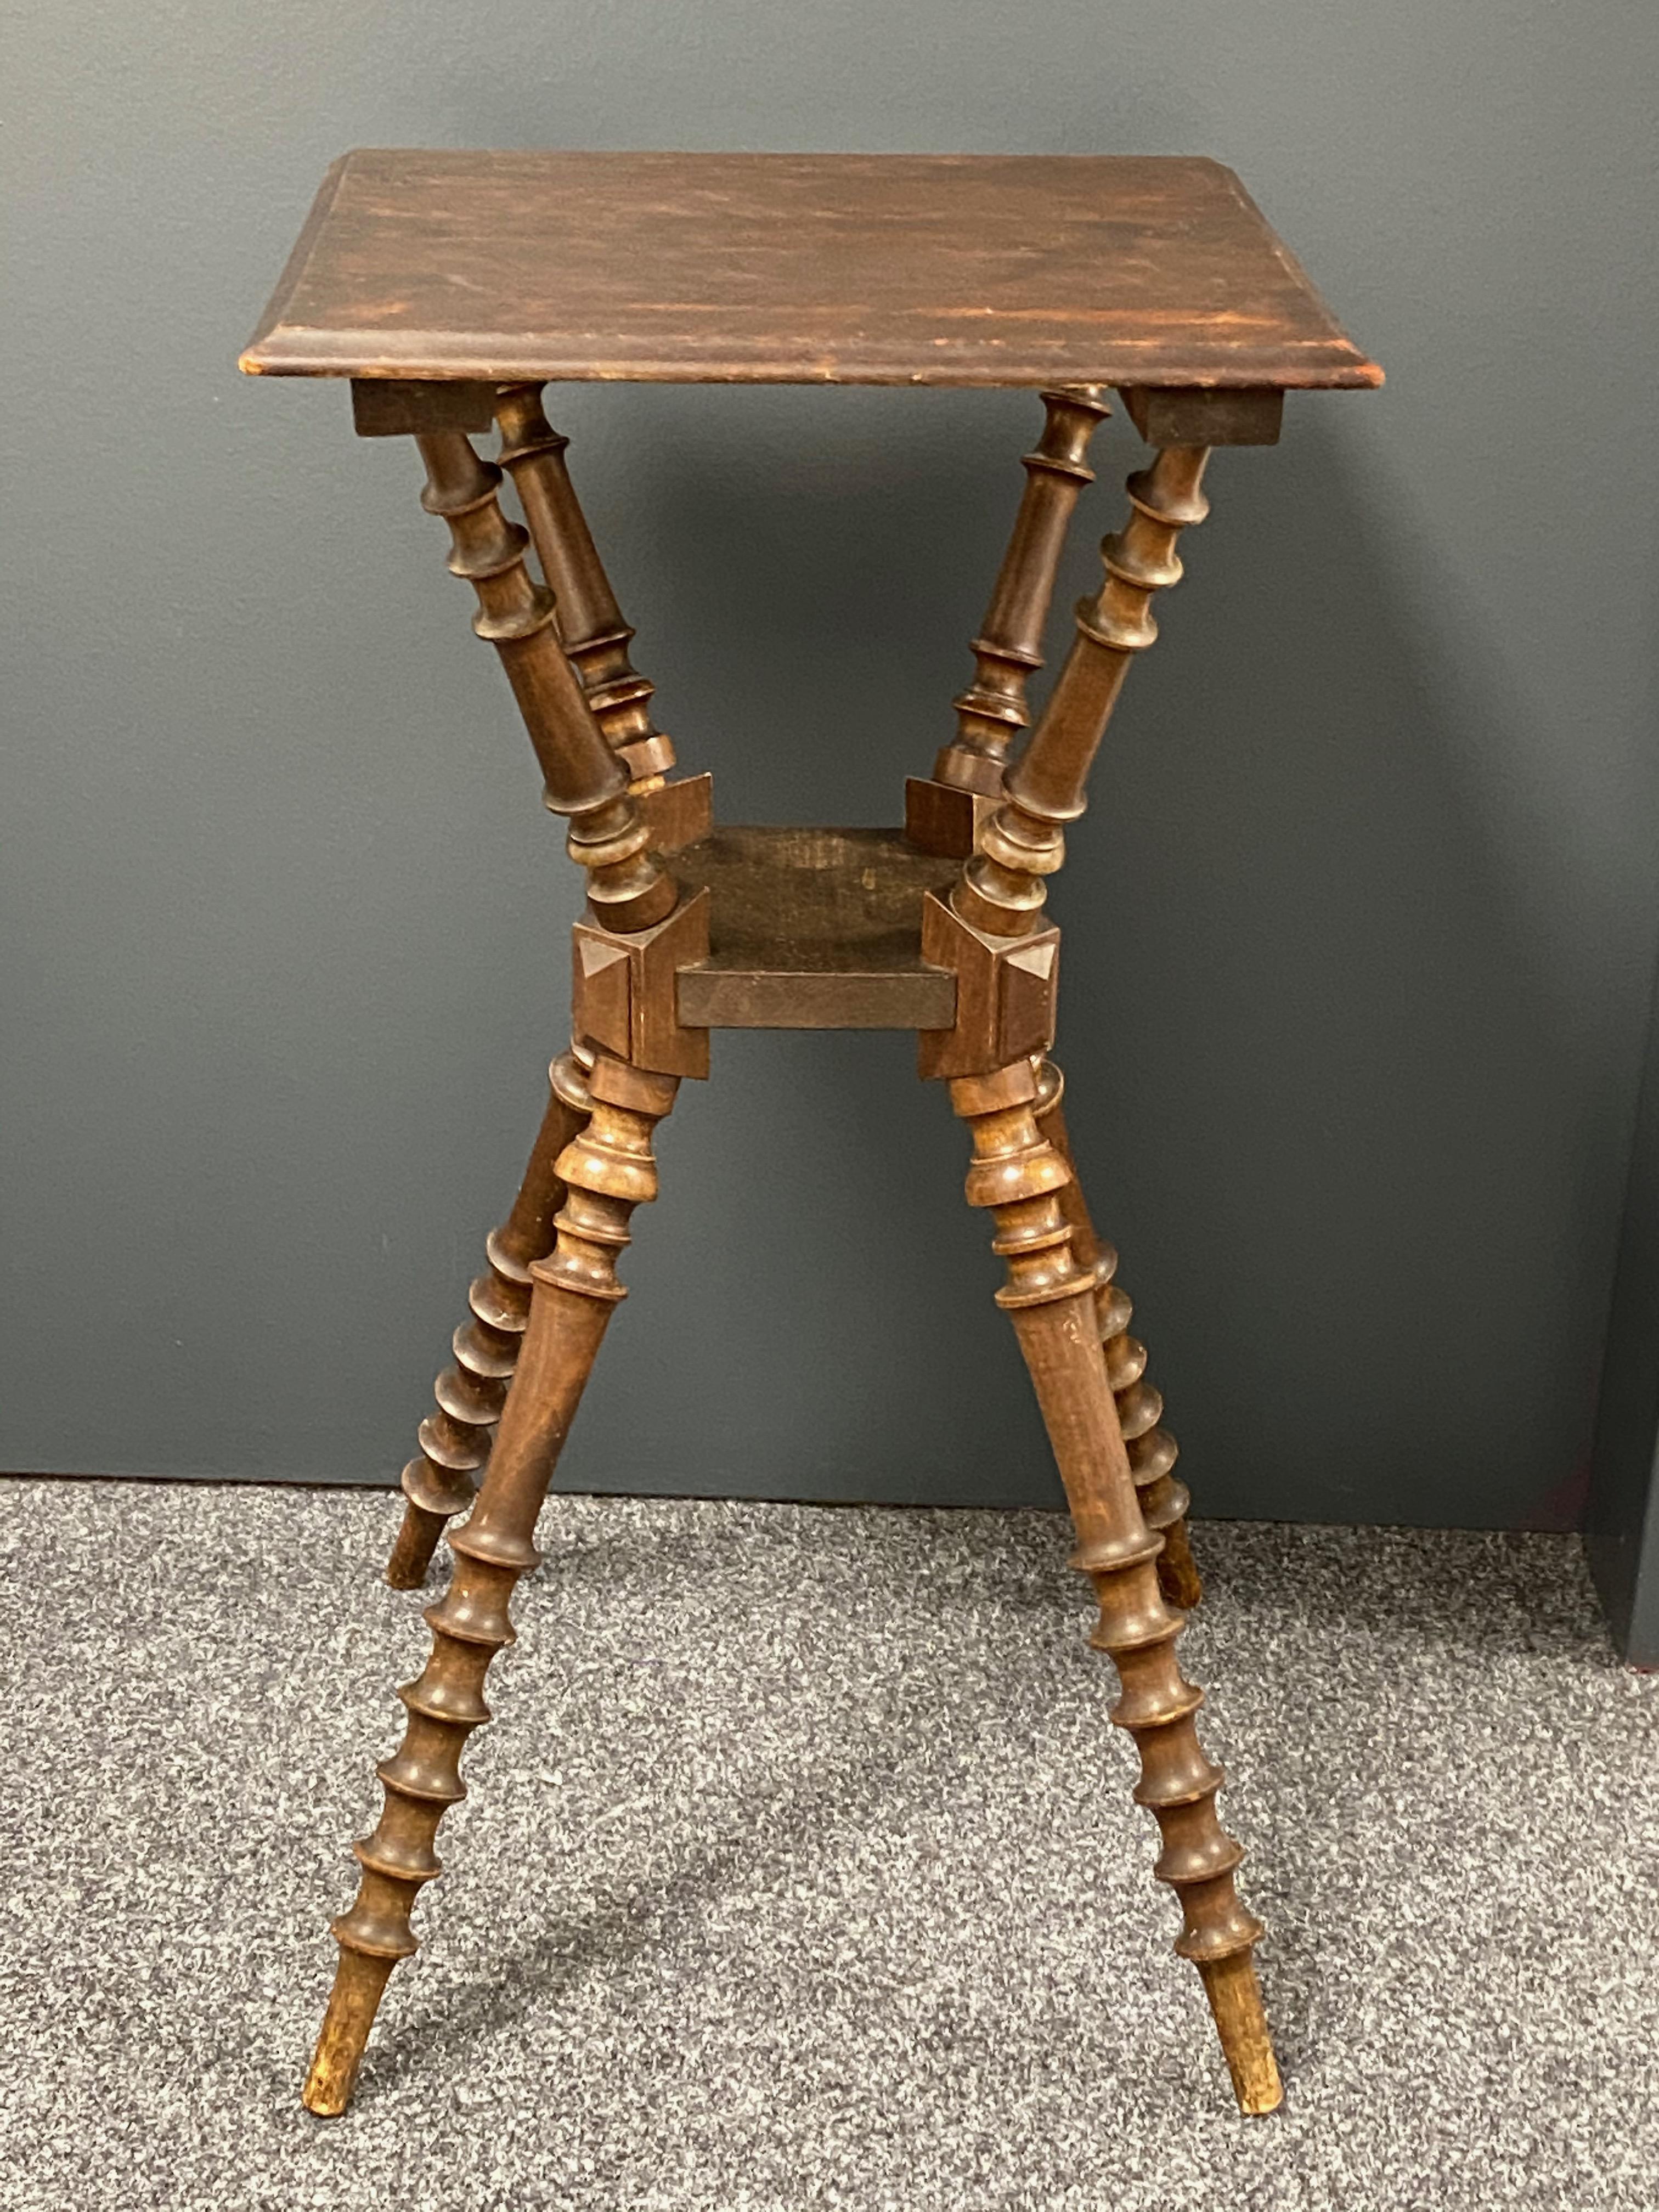 A beautiful wooden Gypsy style table. A pretty piece in the style known as a Gypsy table due to the formation of the crossed bobbin turned legs the table has a wooden top and turned legs. A great piece in good condition. The Table is 28 1/2” high